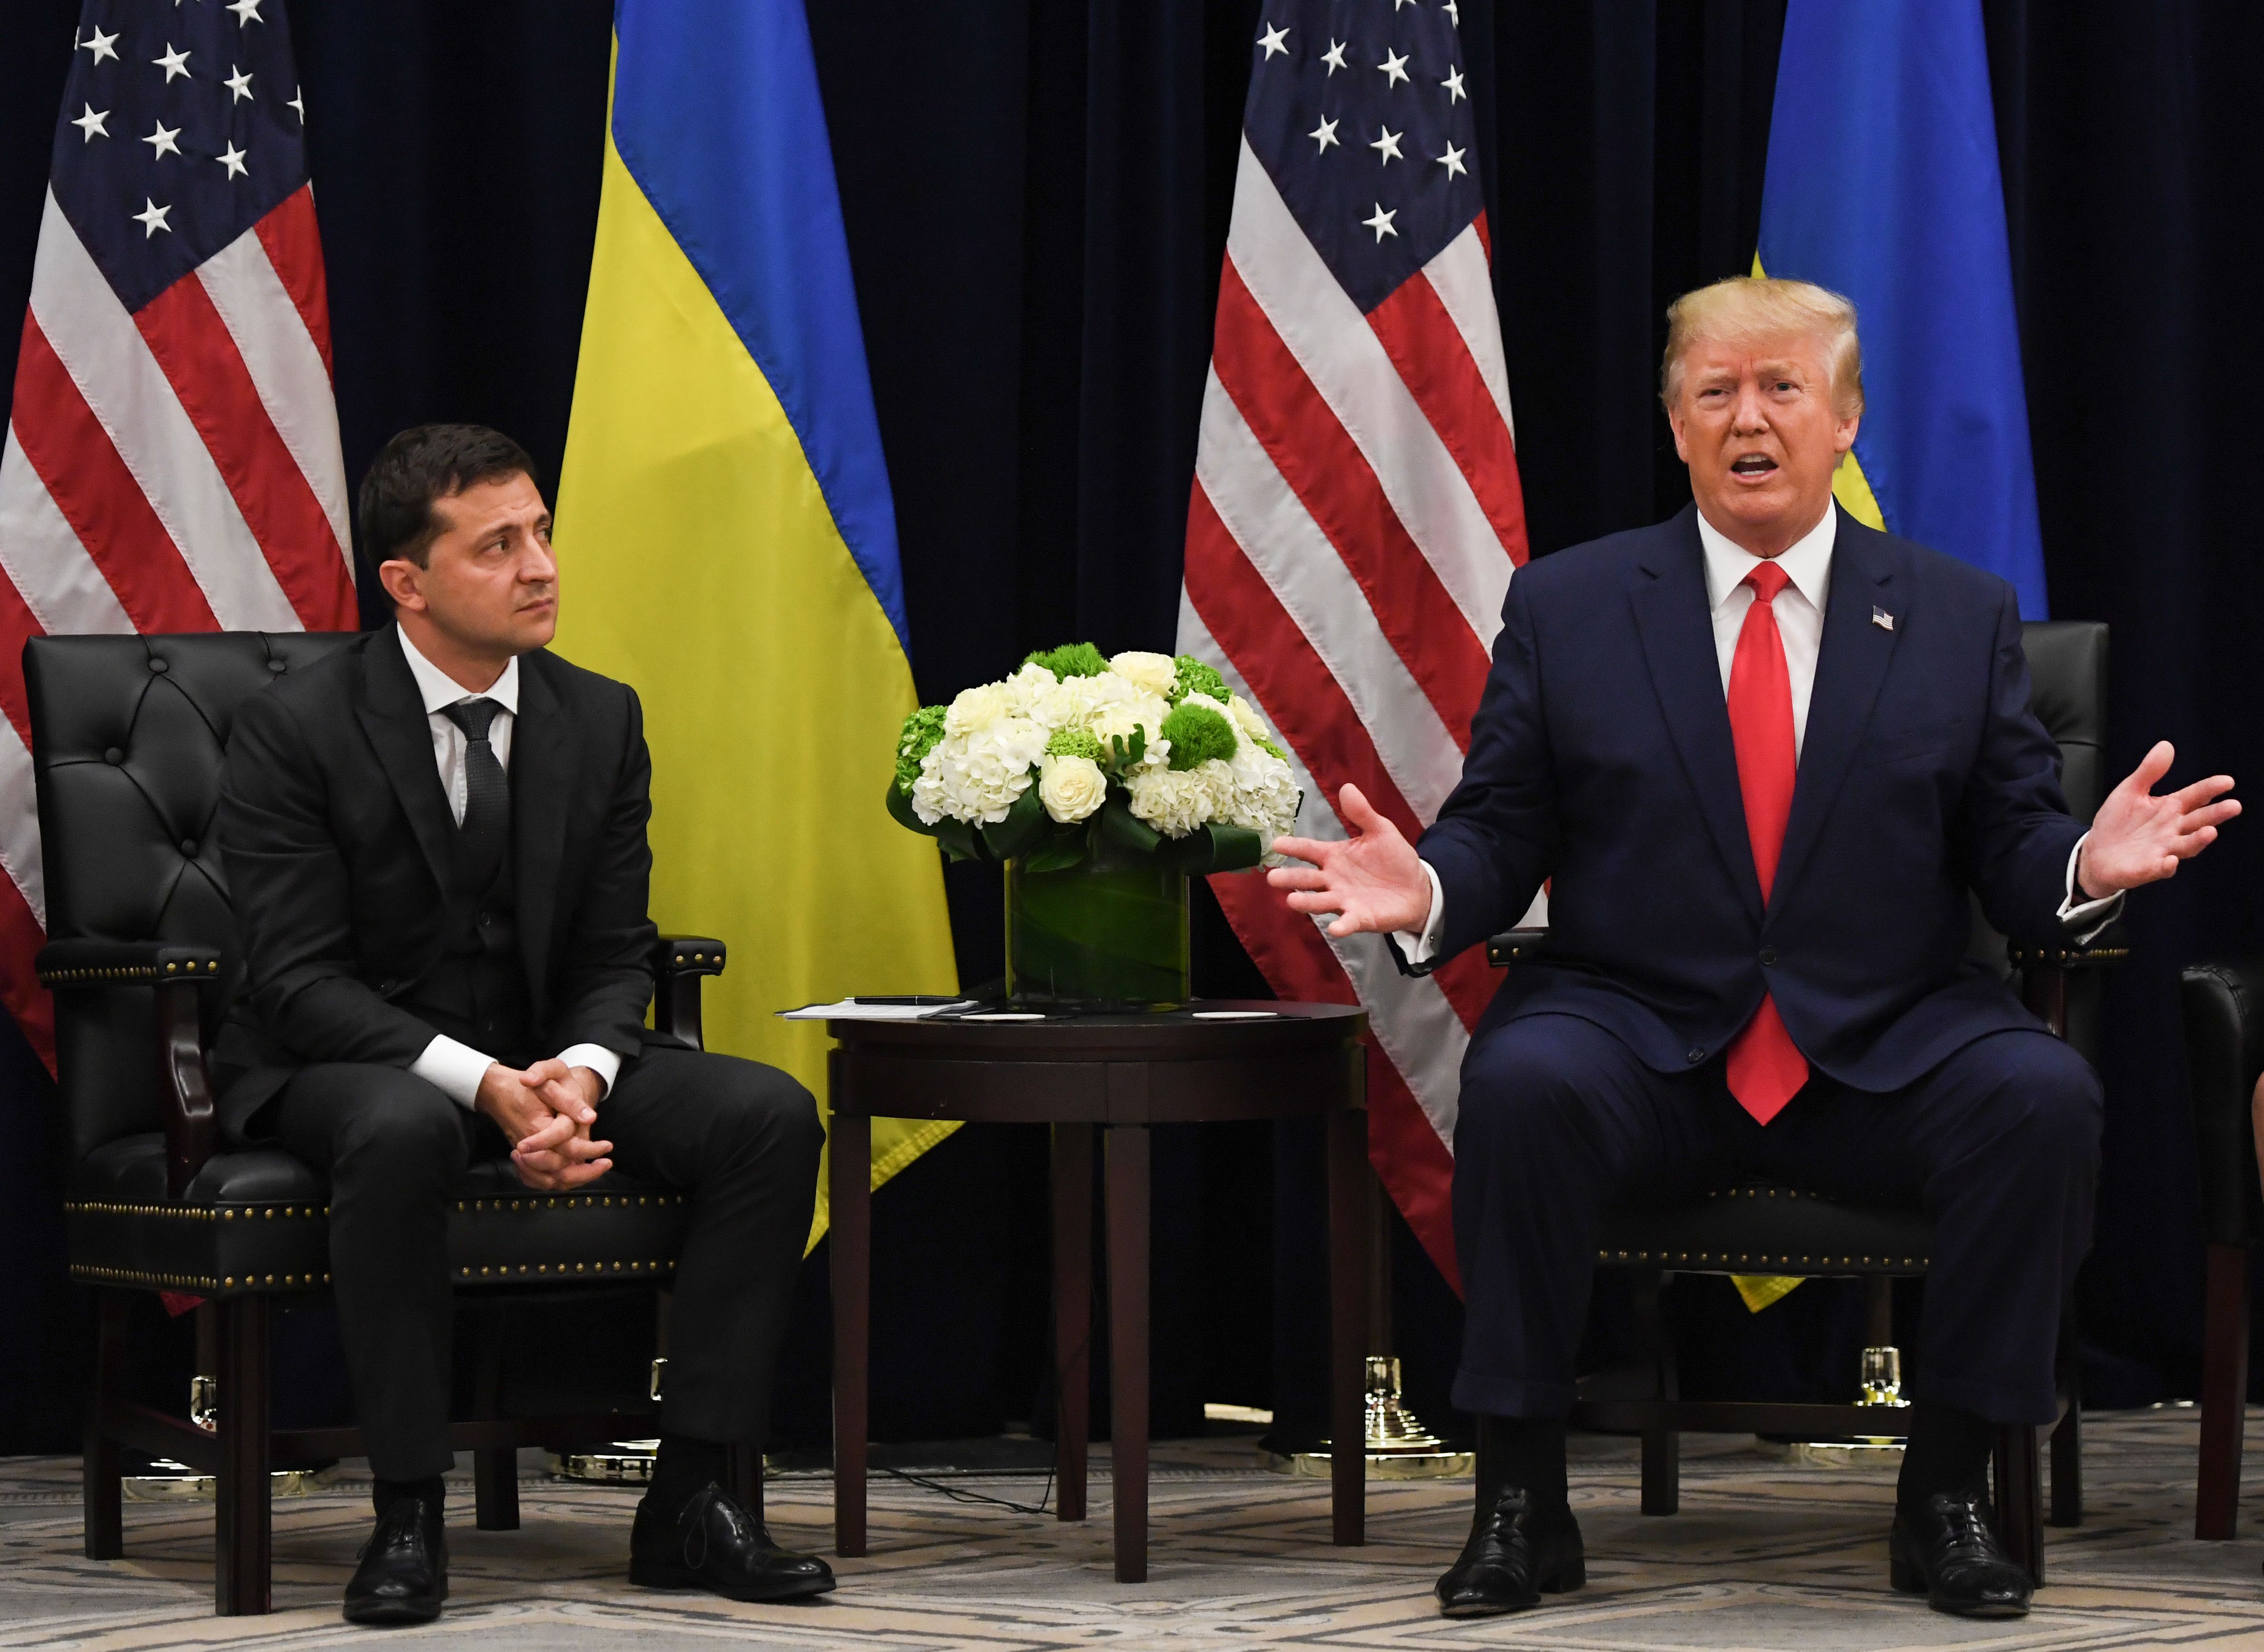 U.S. President Donald Trump speaks as Ukrainian President Volodymyr Zelensky looks on during a meeting in New York on Sept. 25, 2019, on the sidelines of the United Nations General Assembly. (Photo by SAUL LOEB/AFP/Getty Images)